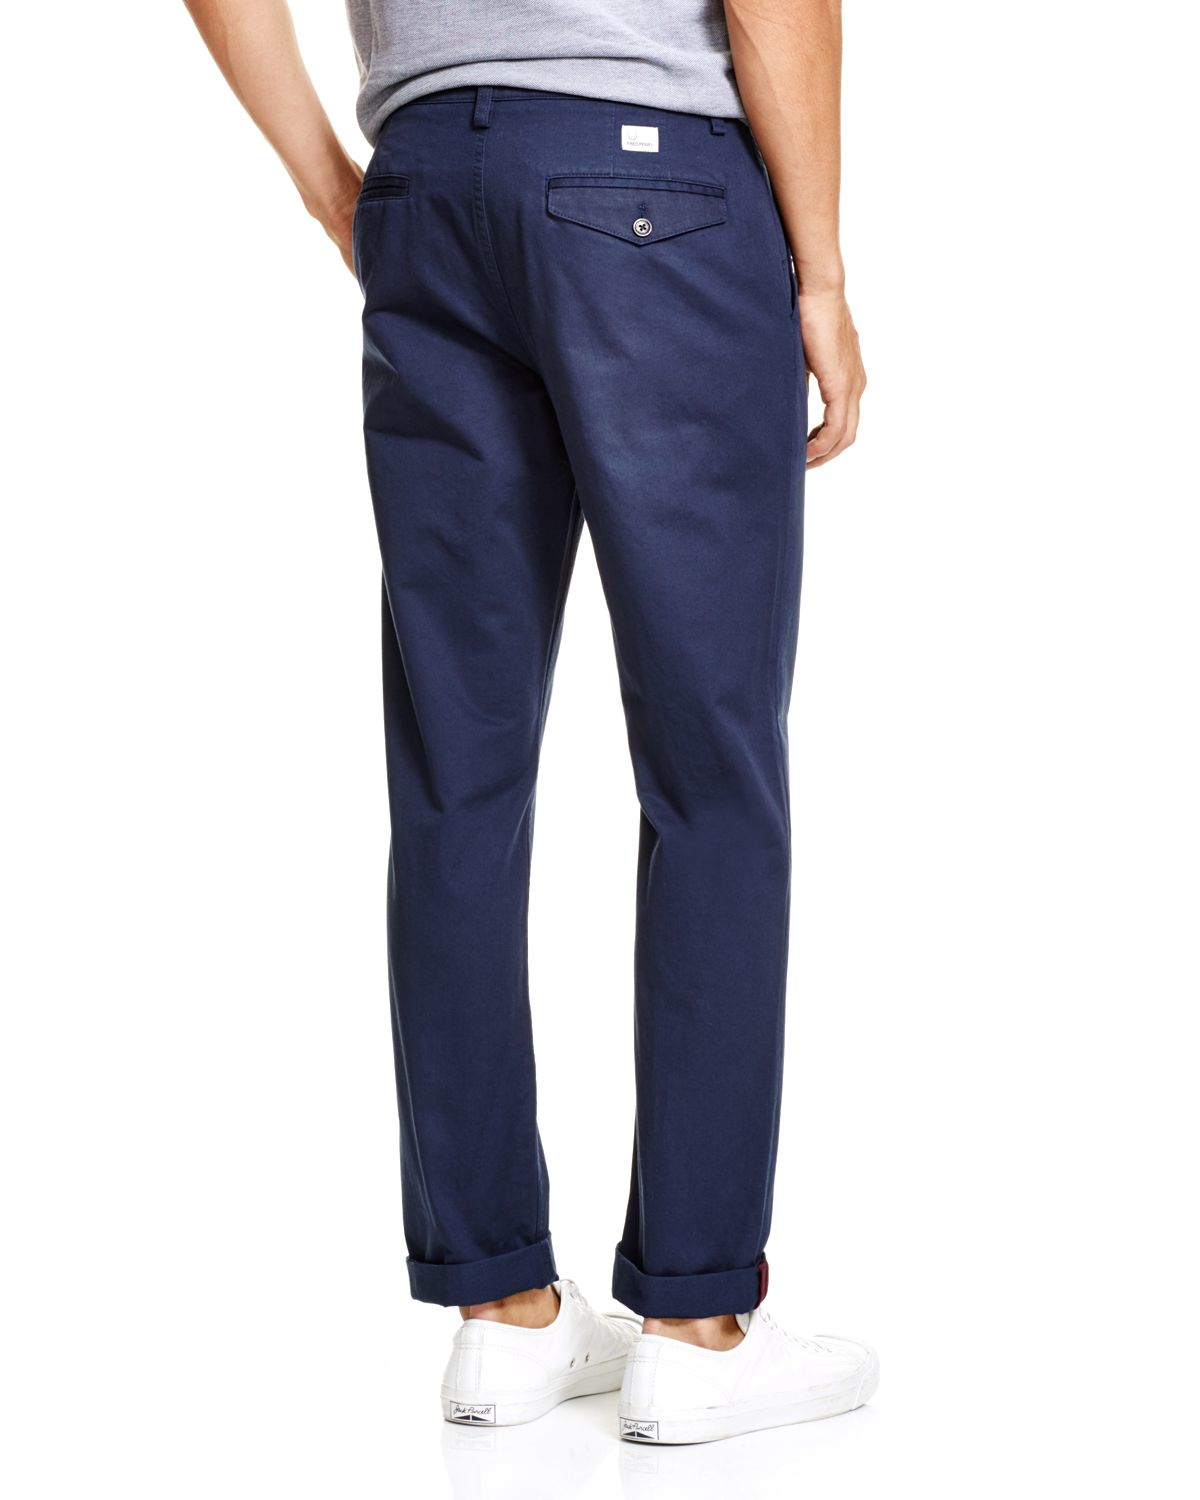 Lyst - Fred Perry Classic Twill Regular Fit Chino Pants in Blue for Men